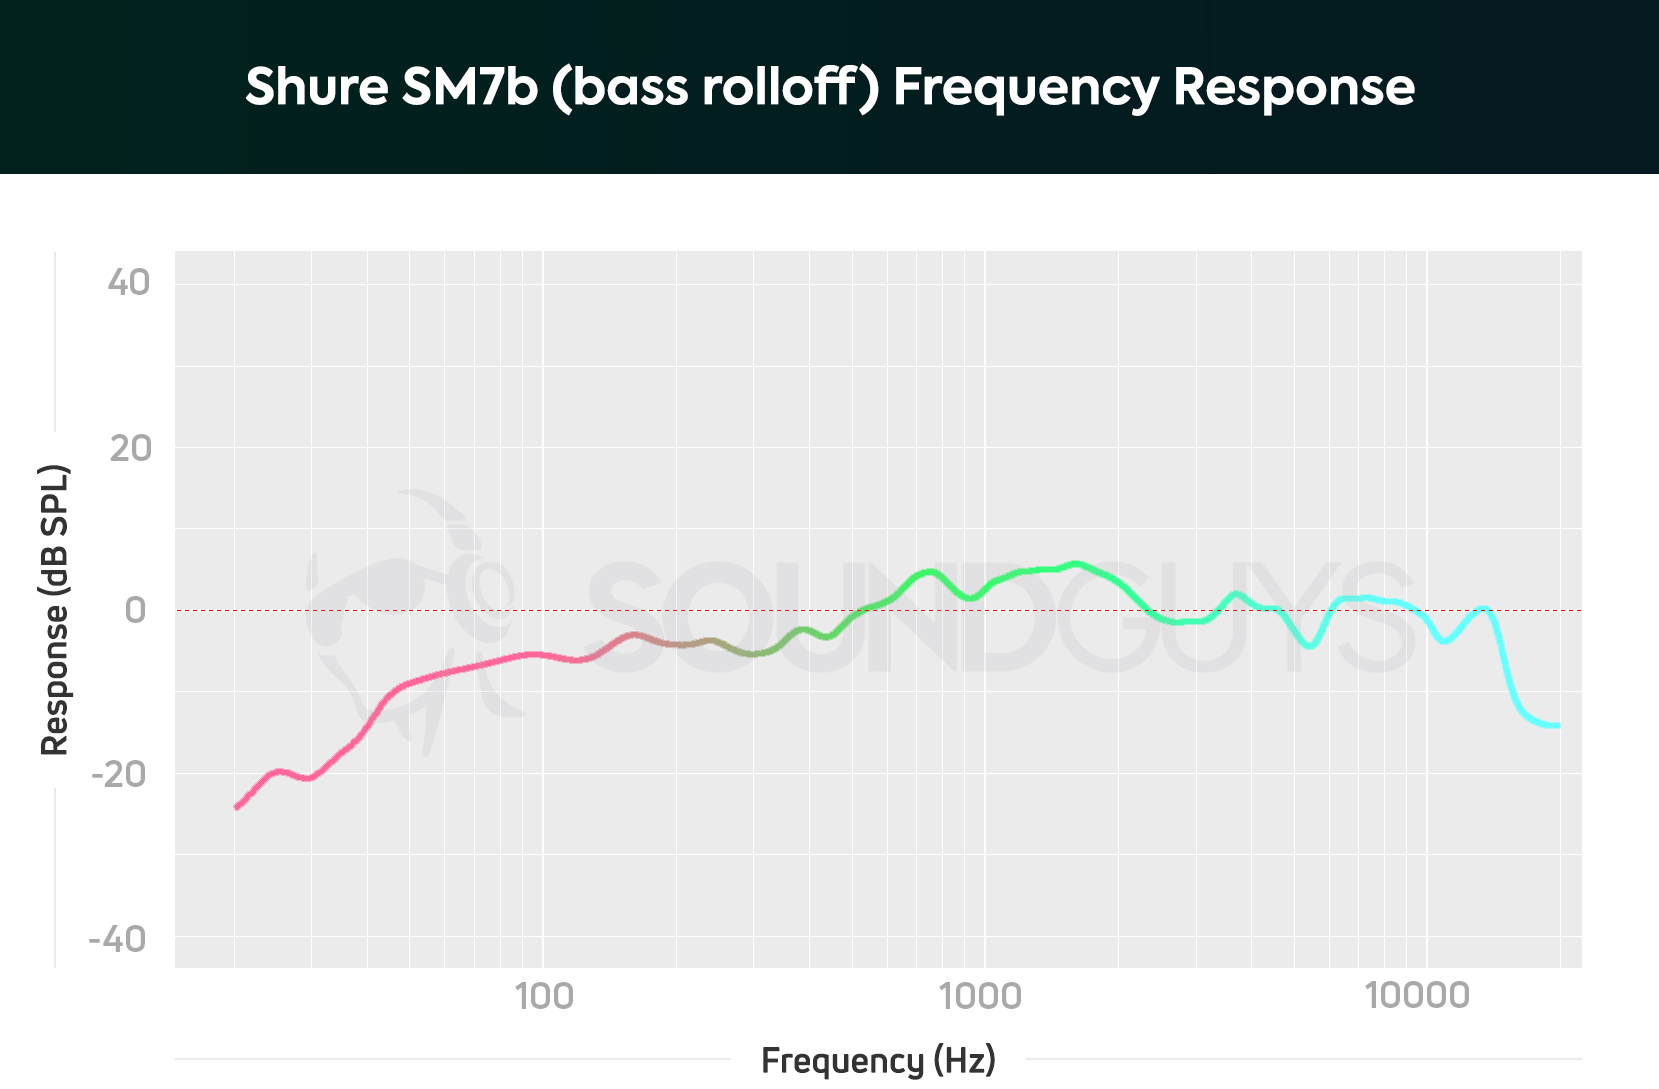 A chart depicting the Shure SM7B dynamic microphone frequency response with bass rolloff recording mode on.